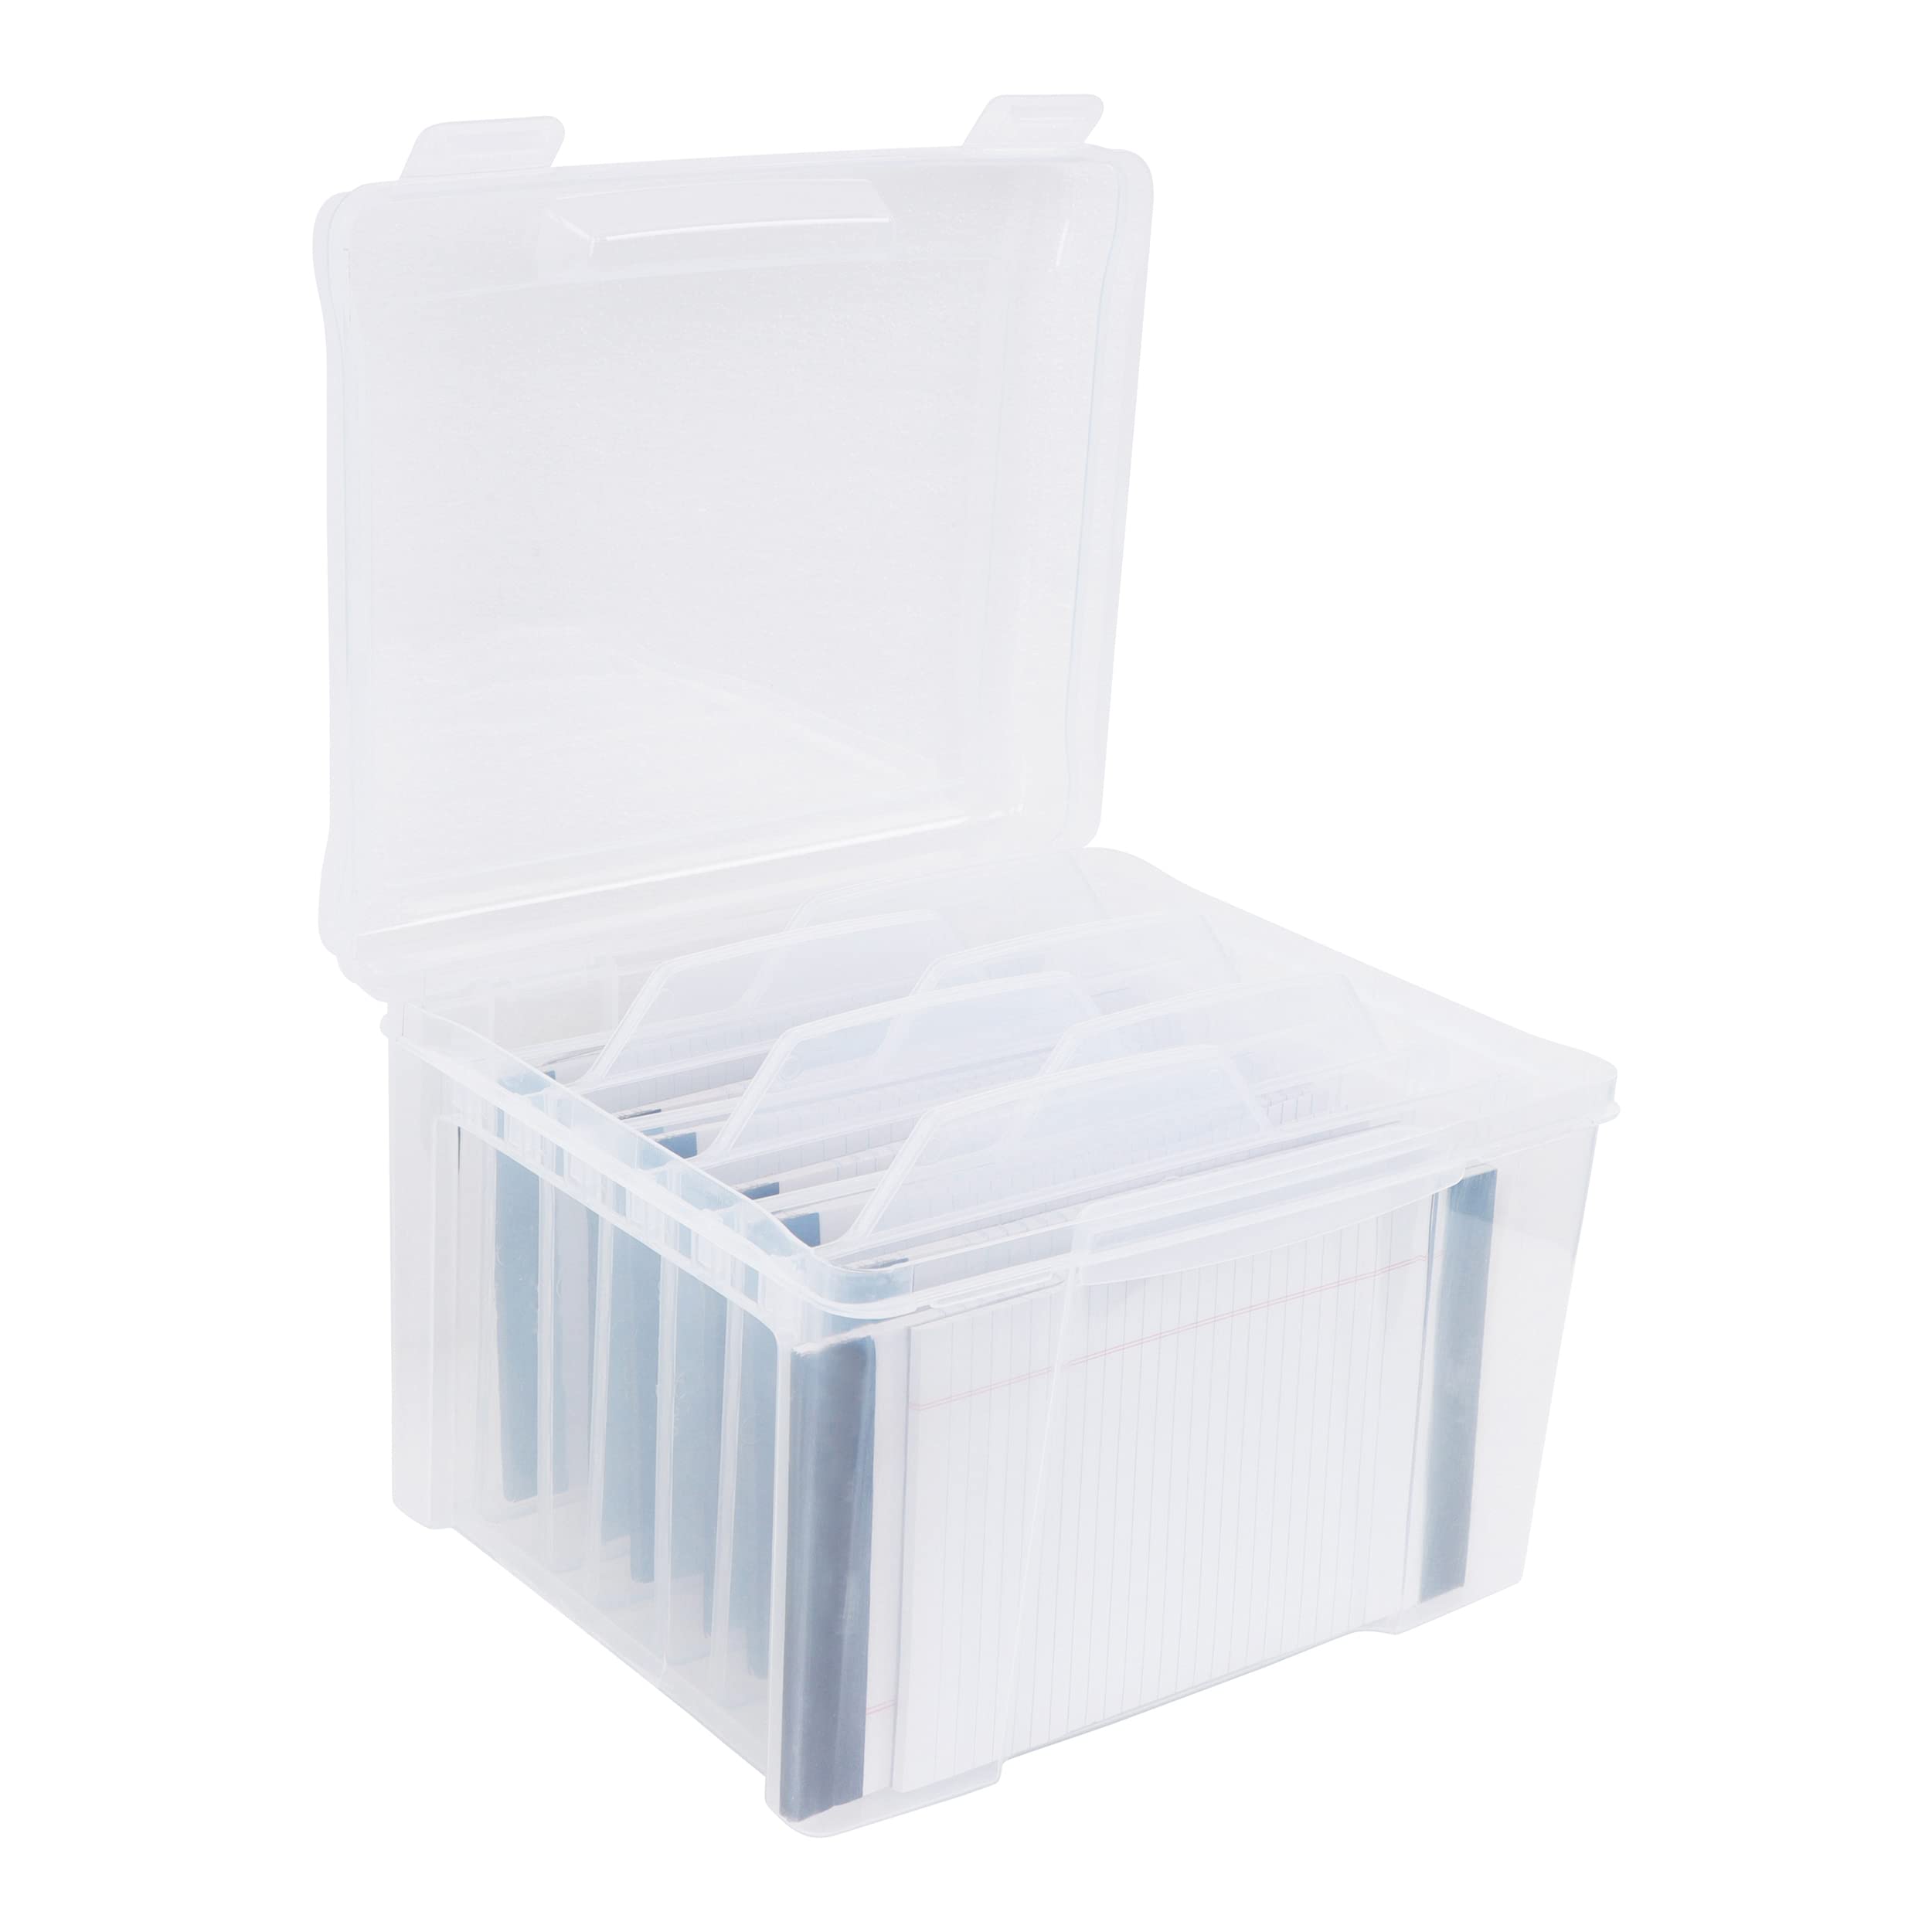 CraftyBook All Occasion Card Storage Box - Clear Plastic Organizer Assorted Card Box with 6 Adjustable Dividers